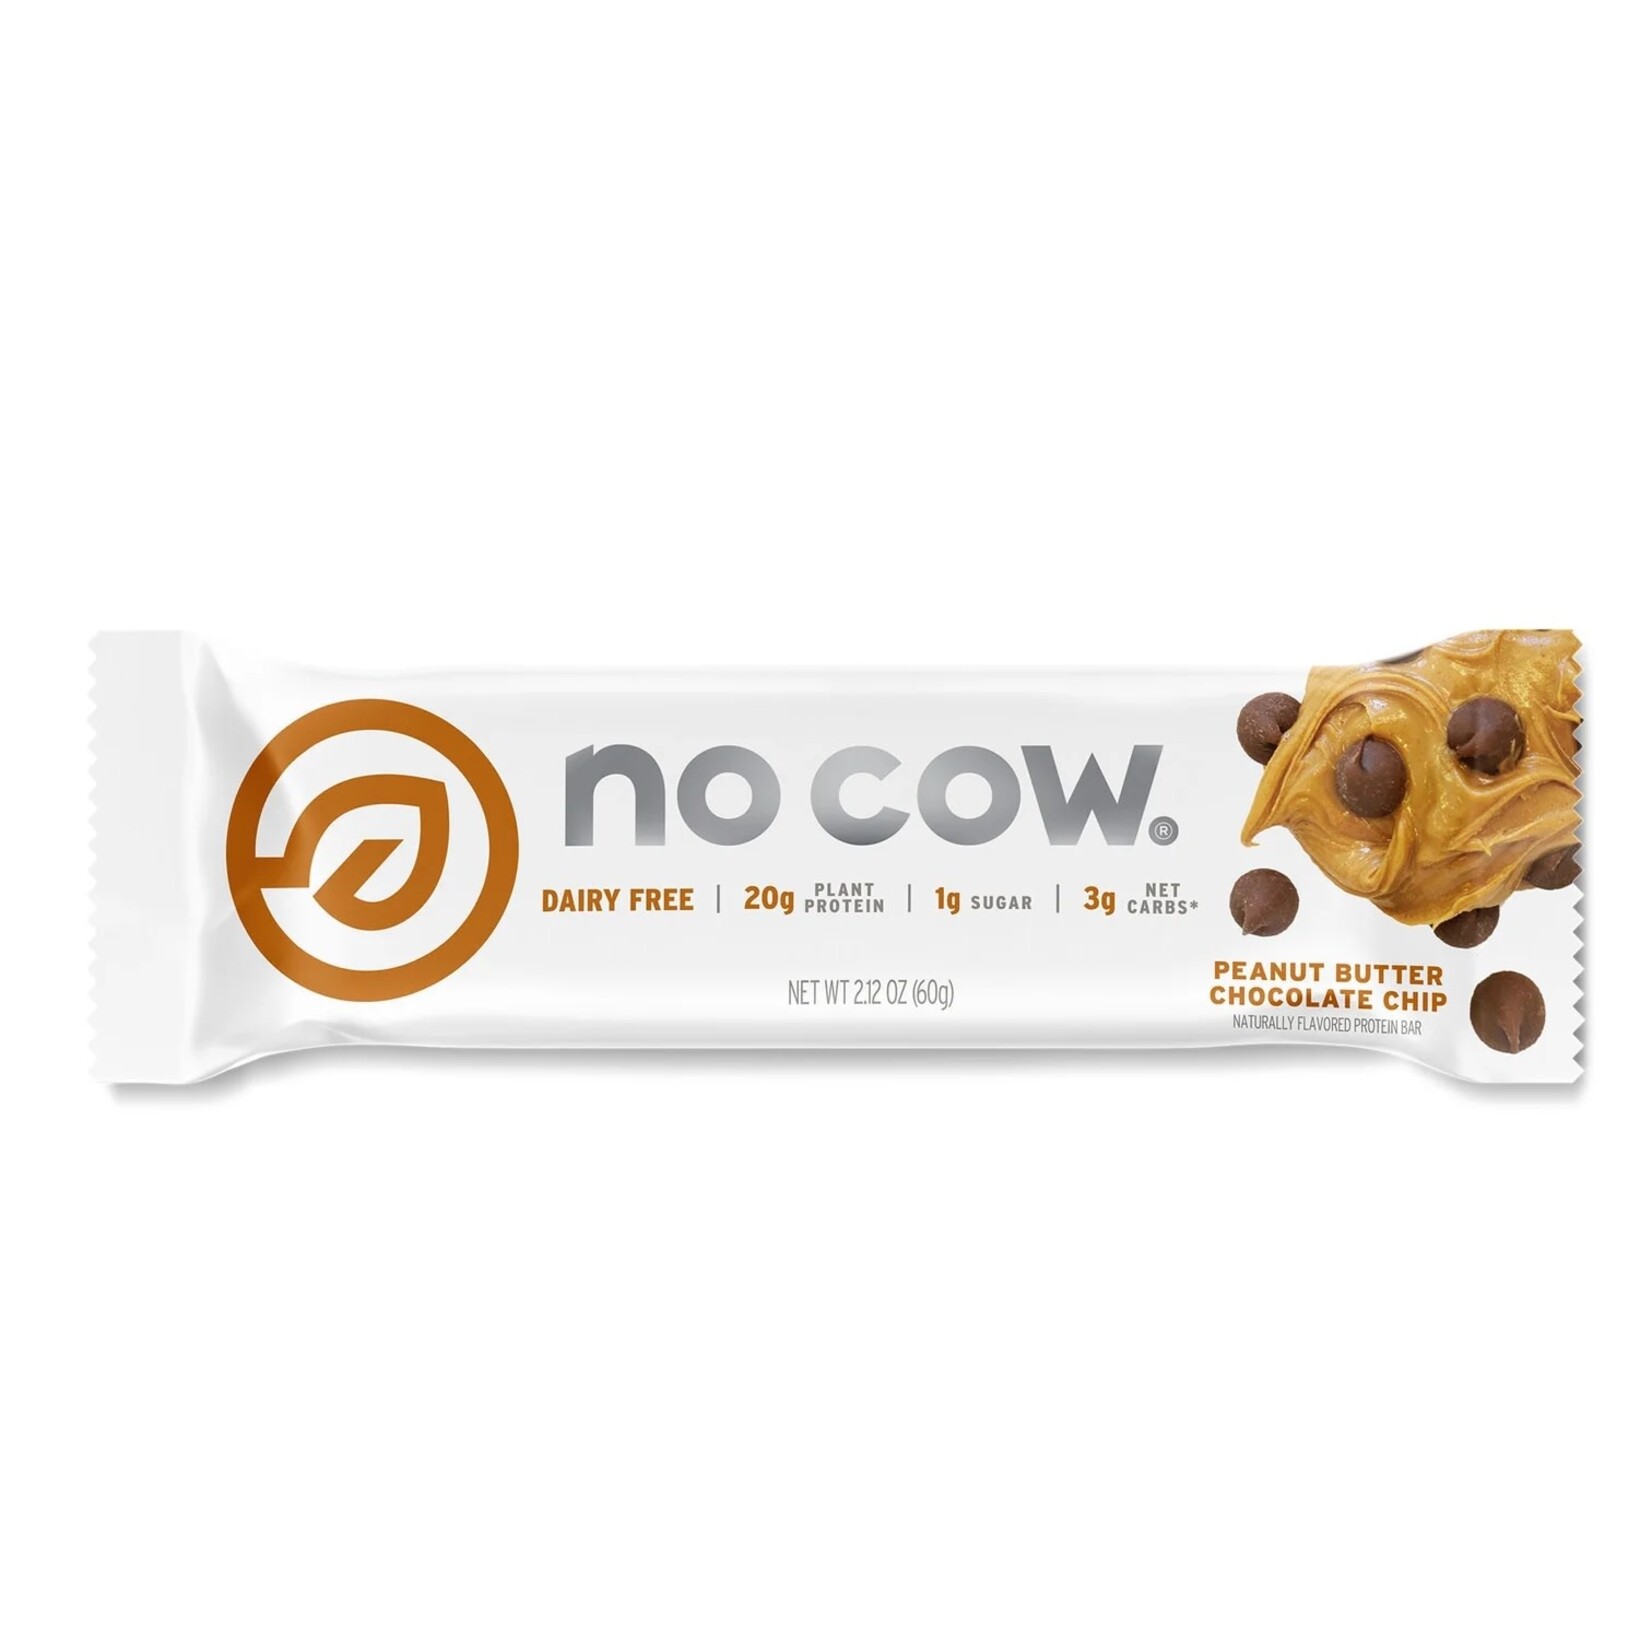 No Cow No Cow Dairy FREE 20g Protein Bar